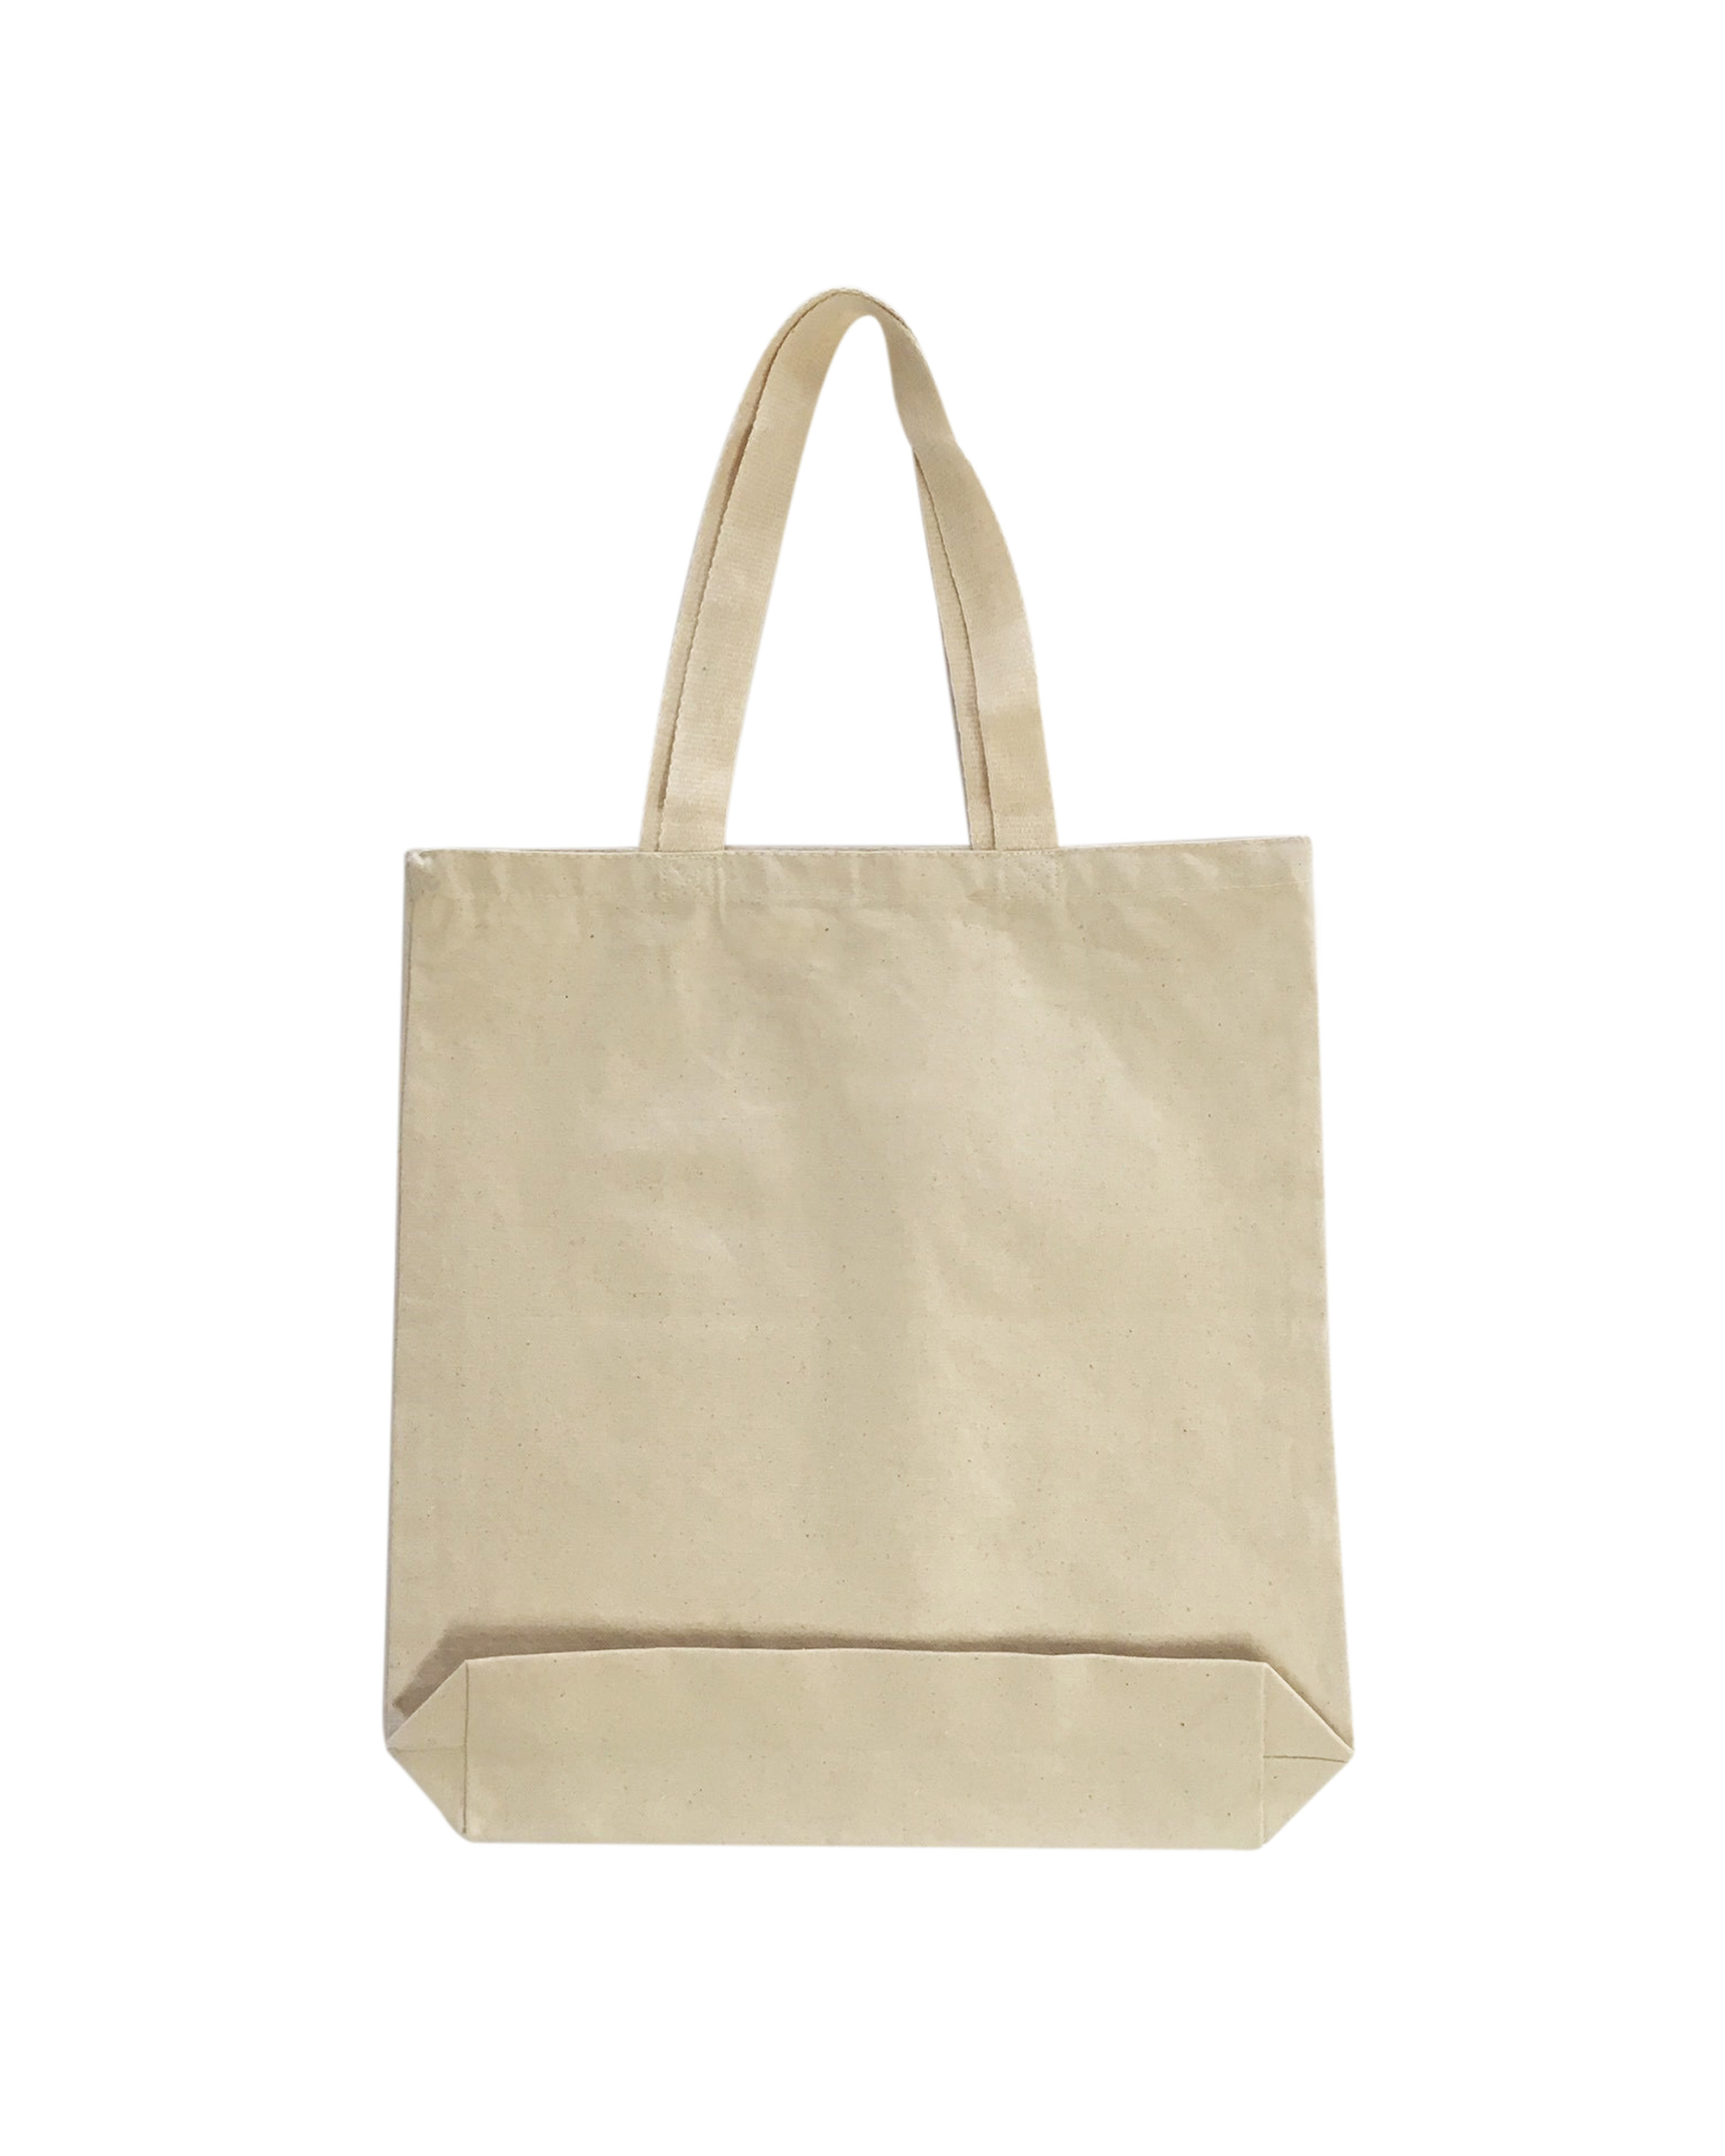 OAD® OAD106 12 oz Cotton Gusseted Tote